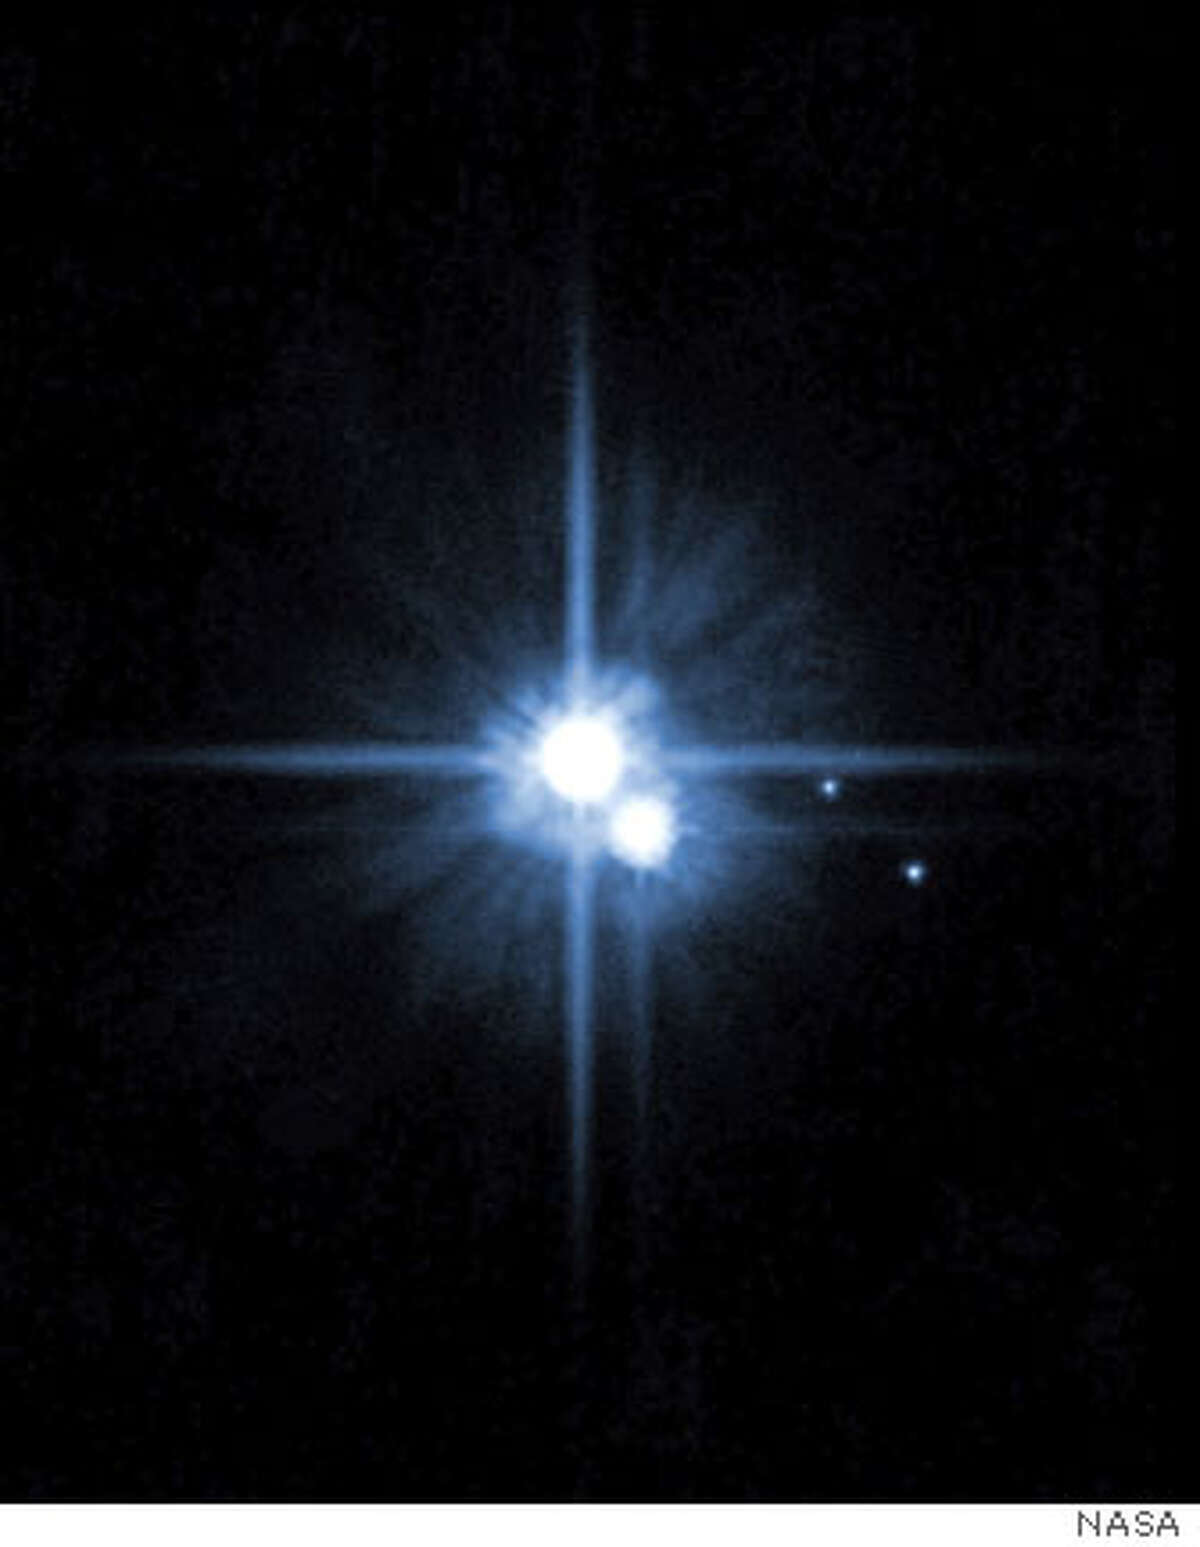 (NYT72) UNDATED -- August 22, 2006 -- Pluto, center, and its three moons in a photograph taken by the Hubble Space Telescope. Under fire from other astronomers and the public, a committee appointed by the International Astronomical Union revised and then revised again a definition proposed last week that would have expanded the number of official planets to 12, locking in Pluto as well as the newly discovered Xena in the outer solar system, as well as the asteroid Ceres and Pluto�s moon Charon. (NASA/The New York Times)